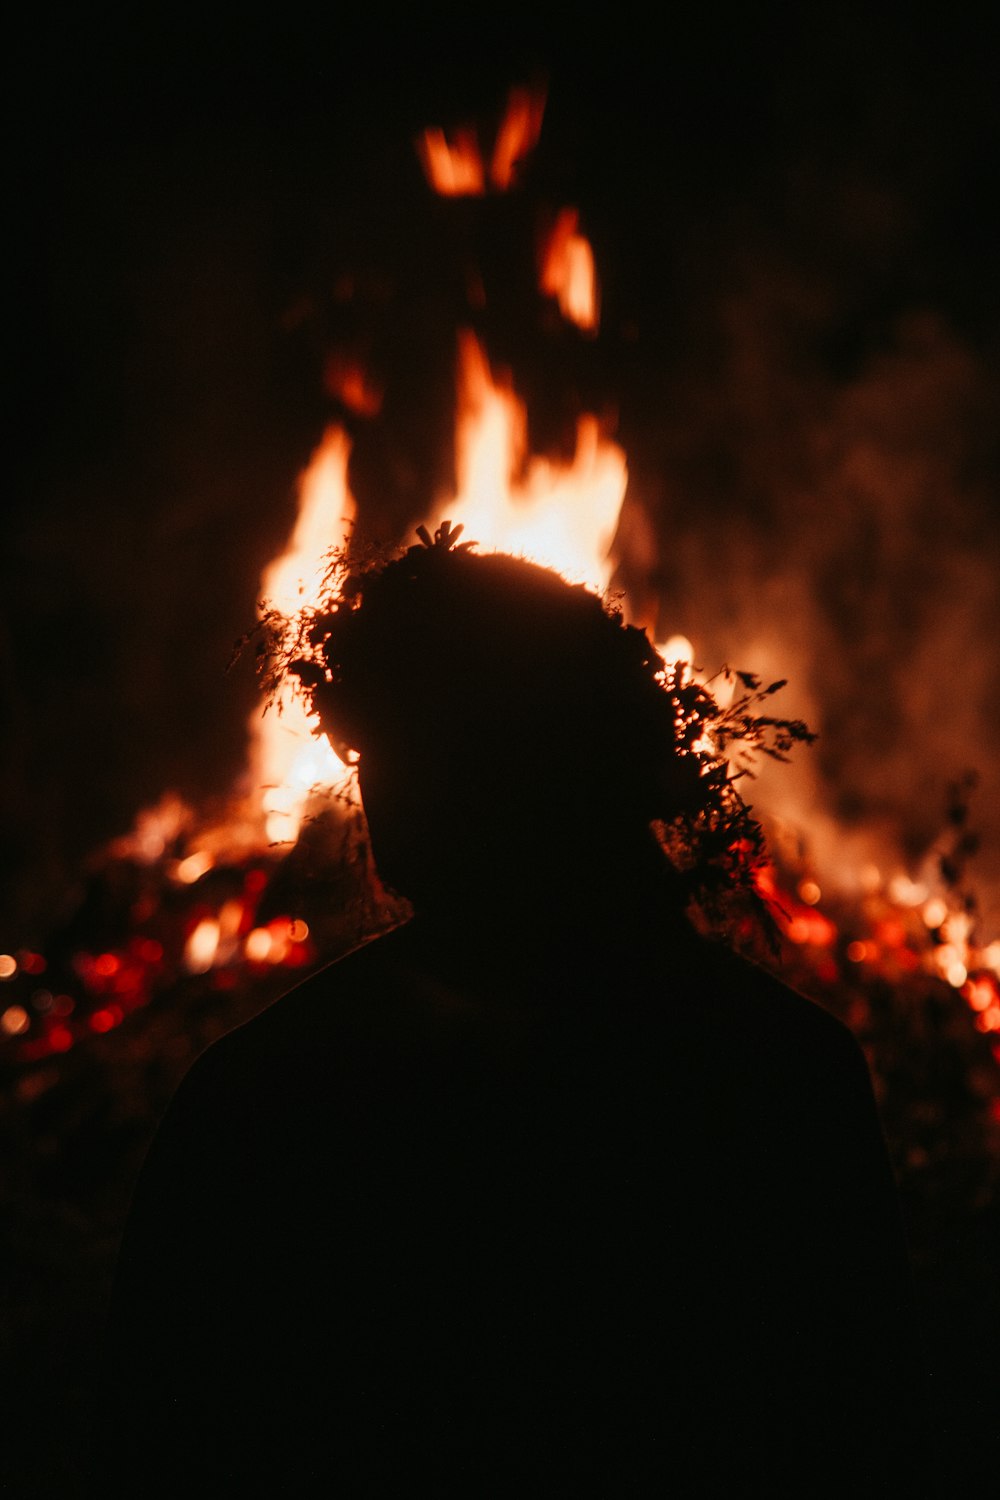 silhouette of man standing in front of fire